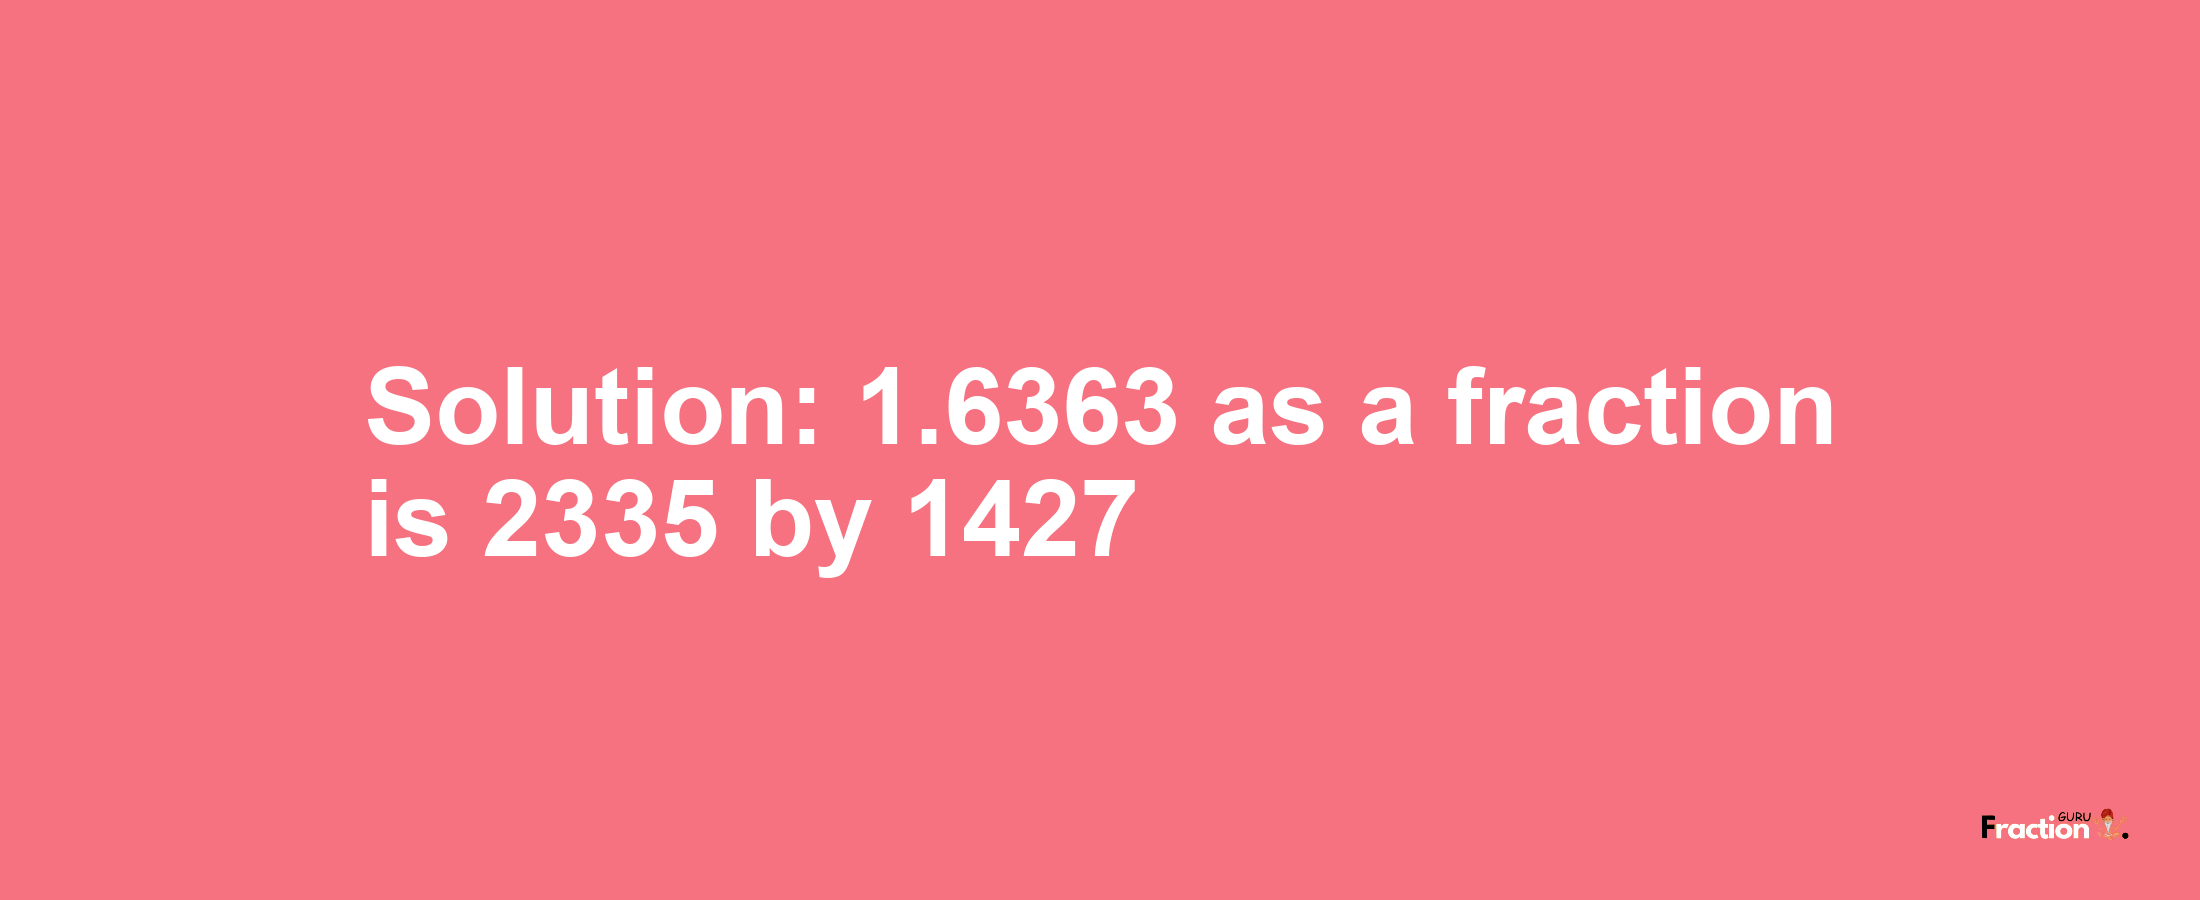 Solution:1.6363 as a fraction is 2335/1427